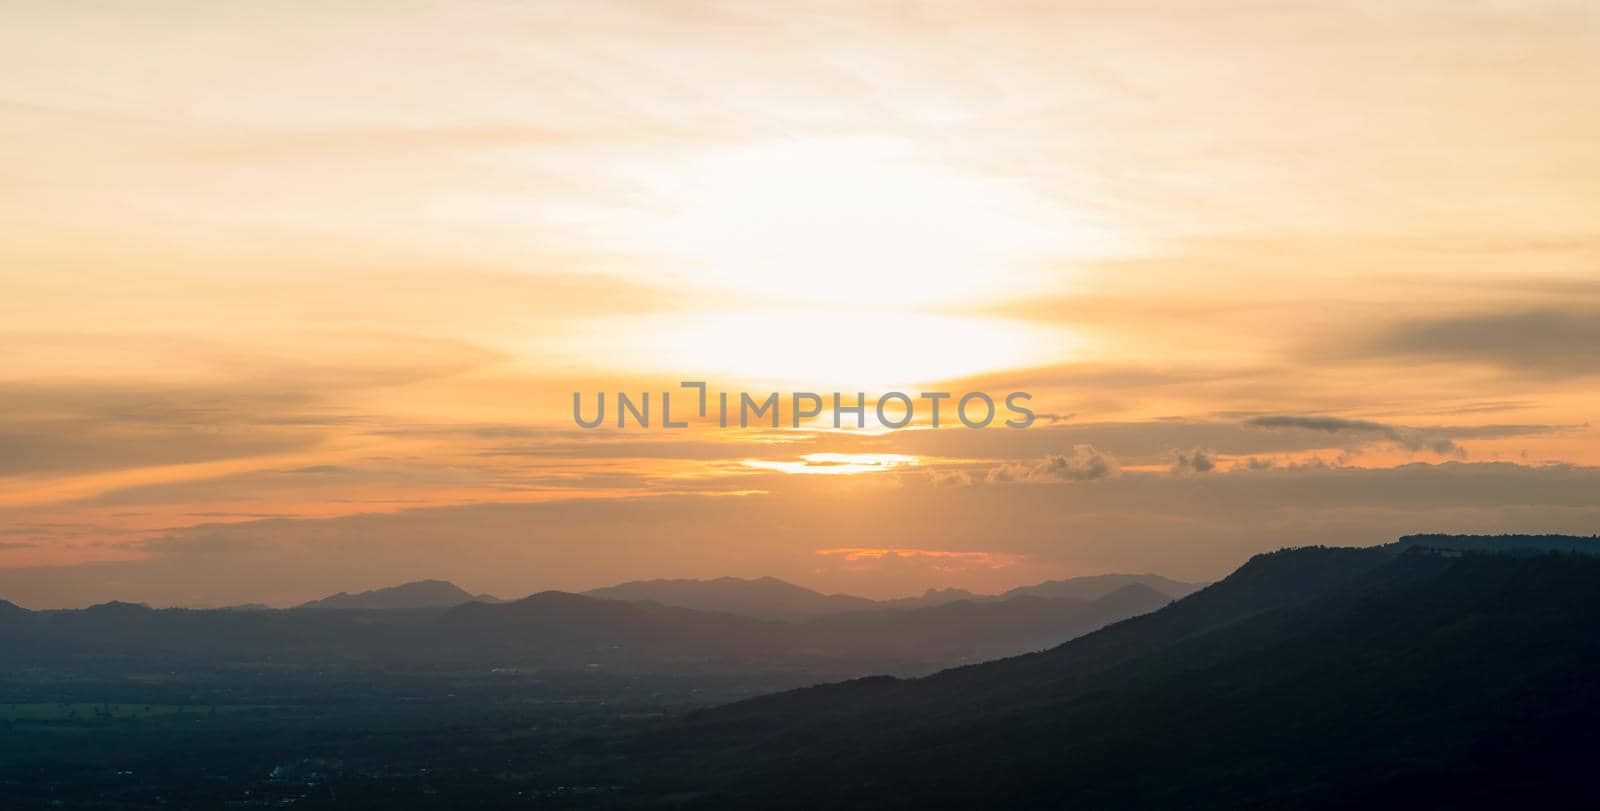 Landscape of mountain range with sunset sky. Mountain at dusk. Orange sky and clouds at sunset. Mountain valley. Mountain layer at dusk. Beauty in nature. Tranquility scene. Beautiful sunset sky.